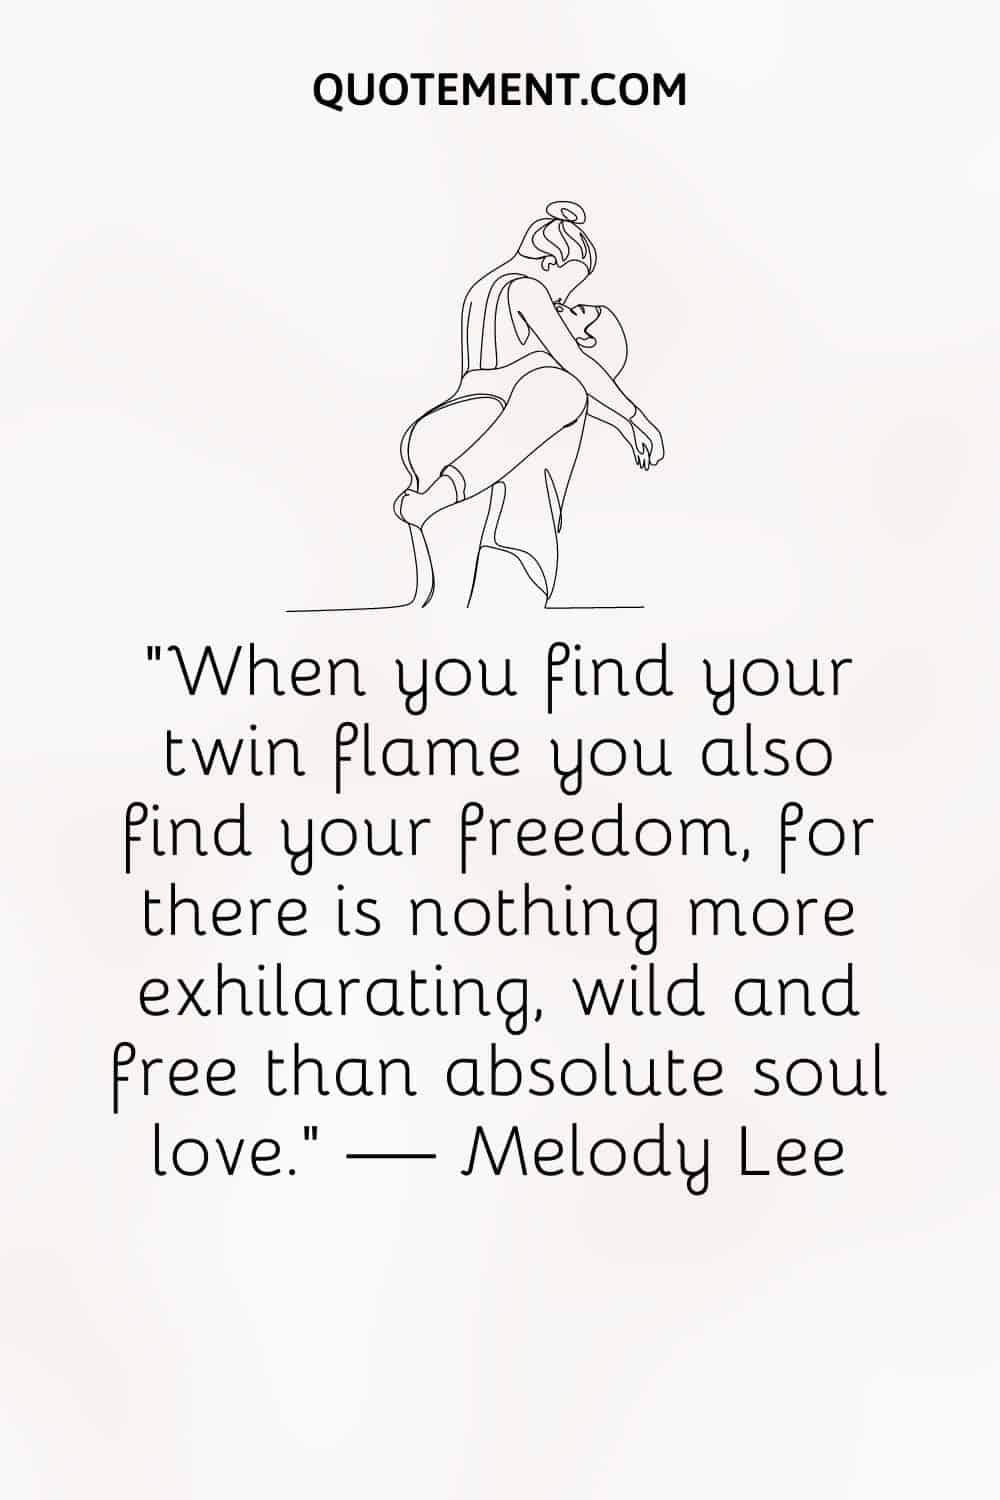 When you find your twin flame you also find your freedom, for there is nothing more exhilarating, wild and free than absolute soul love